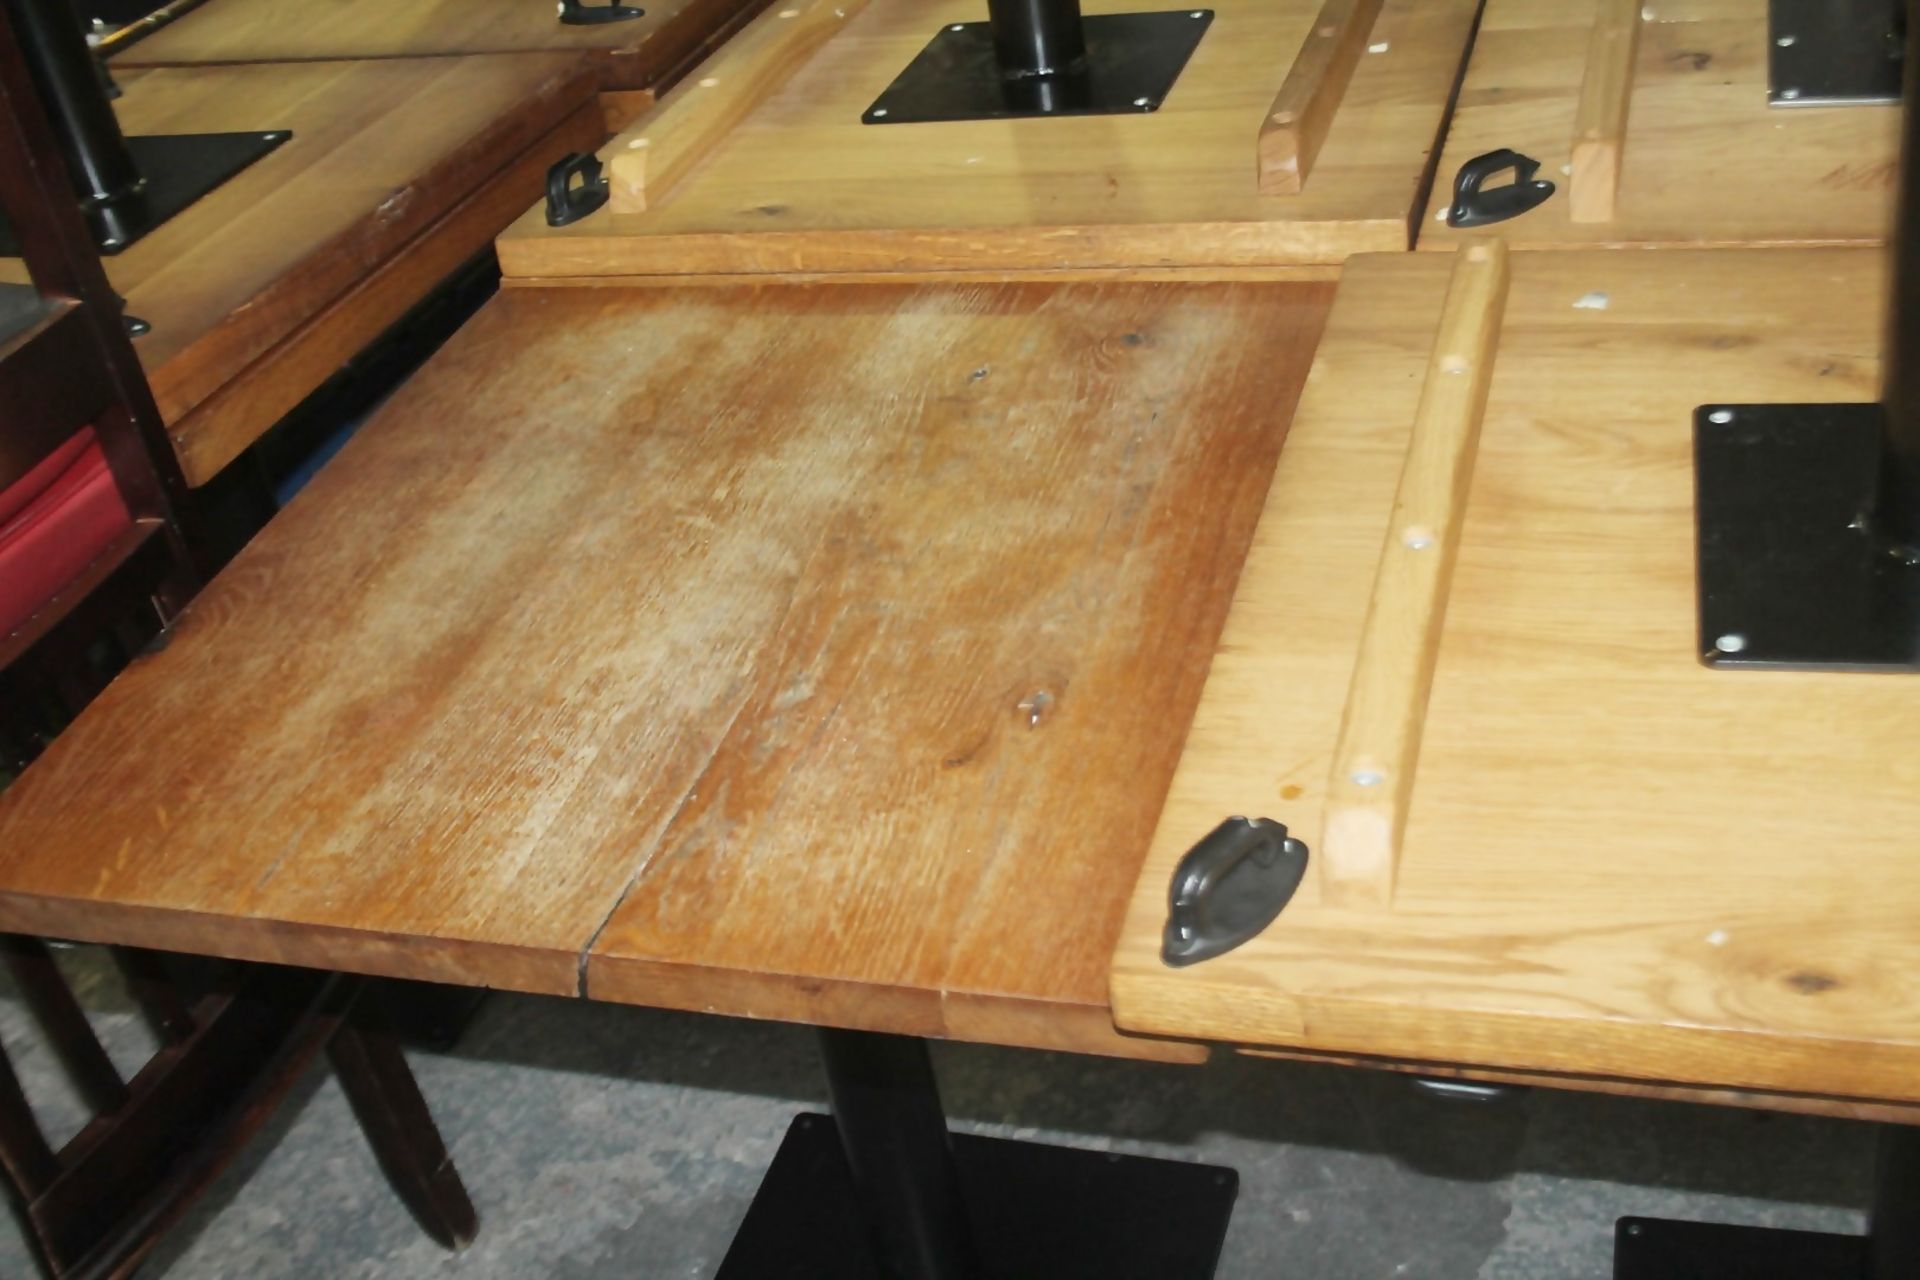 4 x Solid Oak Restaurant Dining Tables - Natural Rustic Knotty Oak Tops With Black Cast Iron Bases - Image 3 of 8